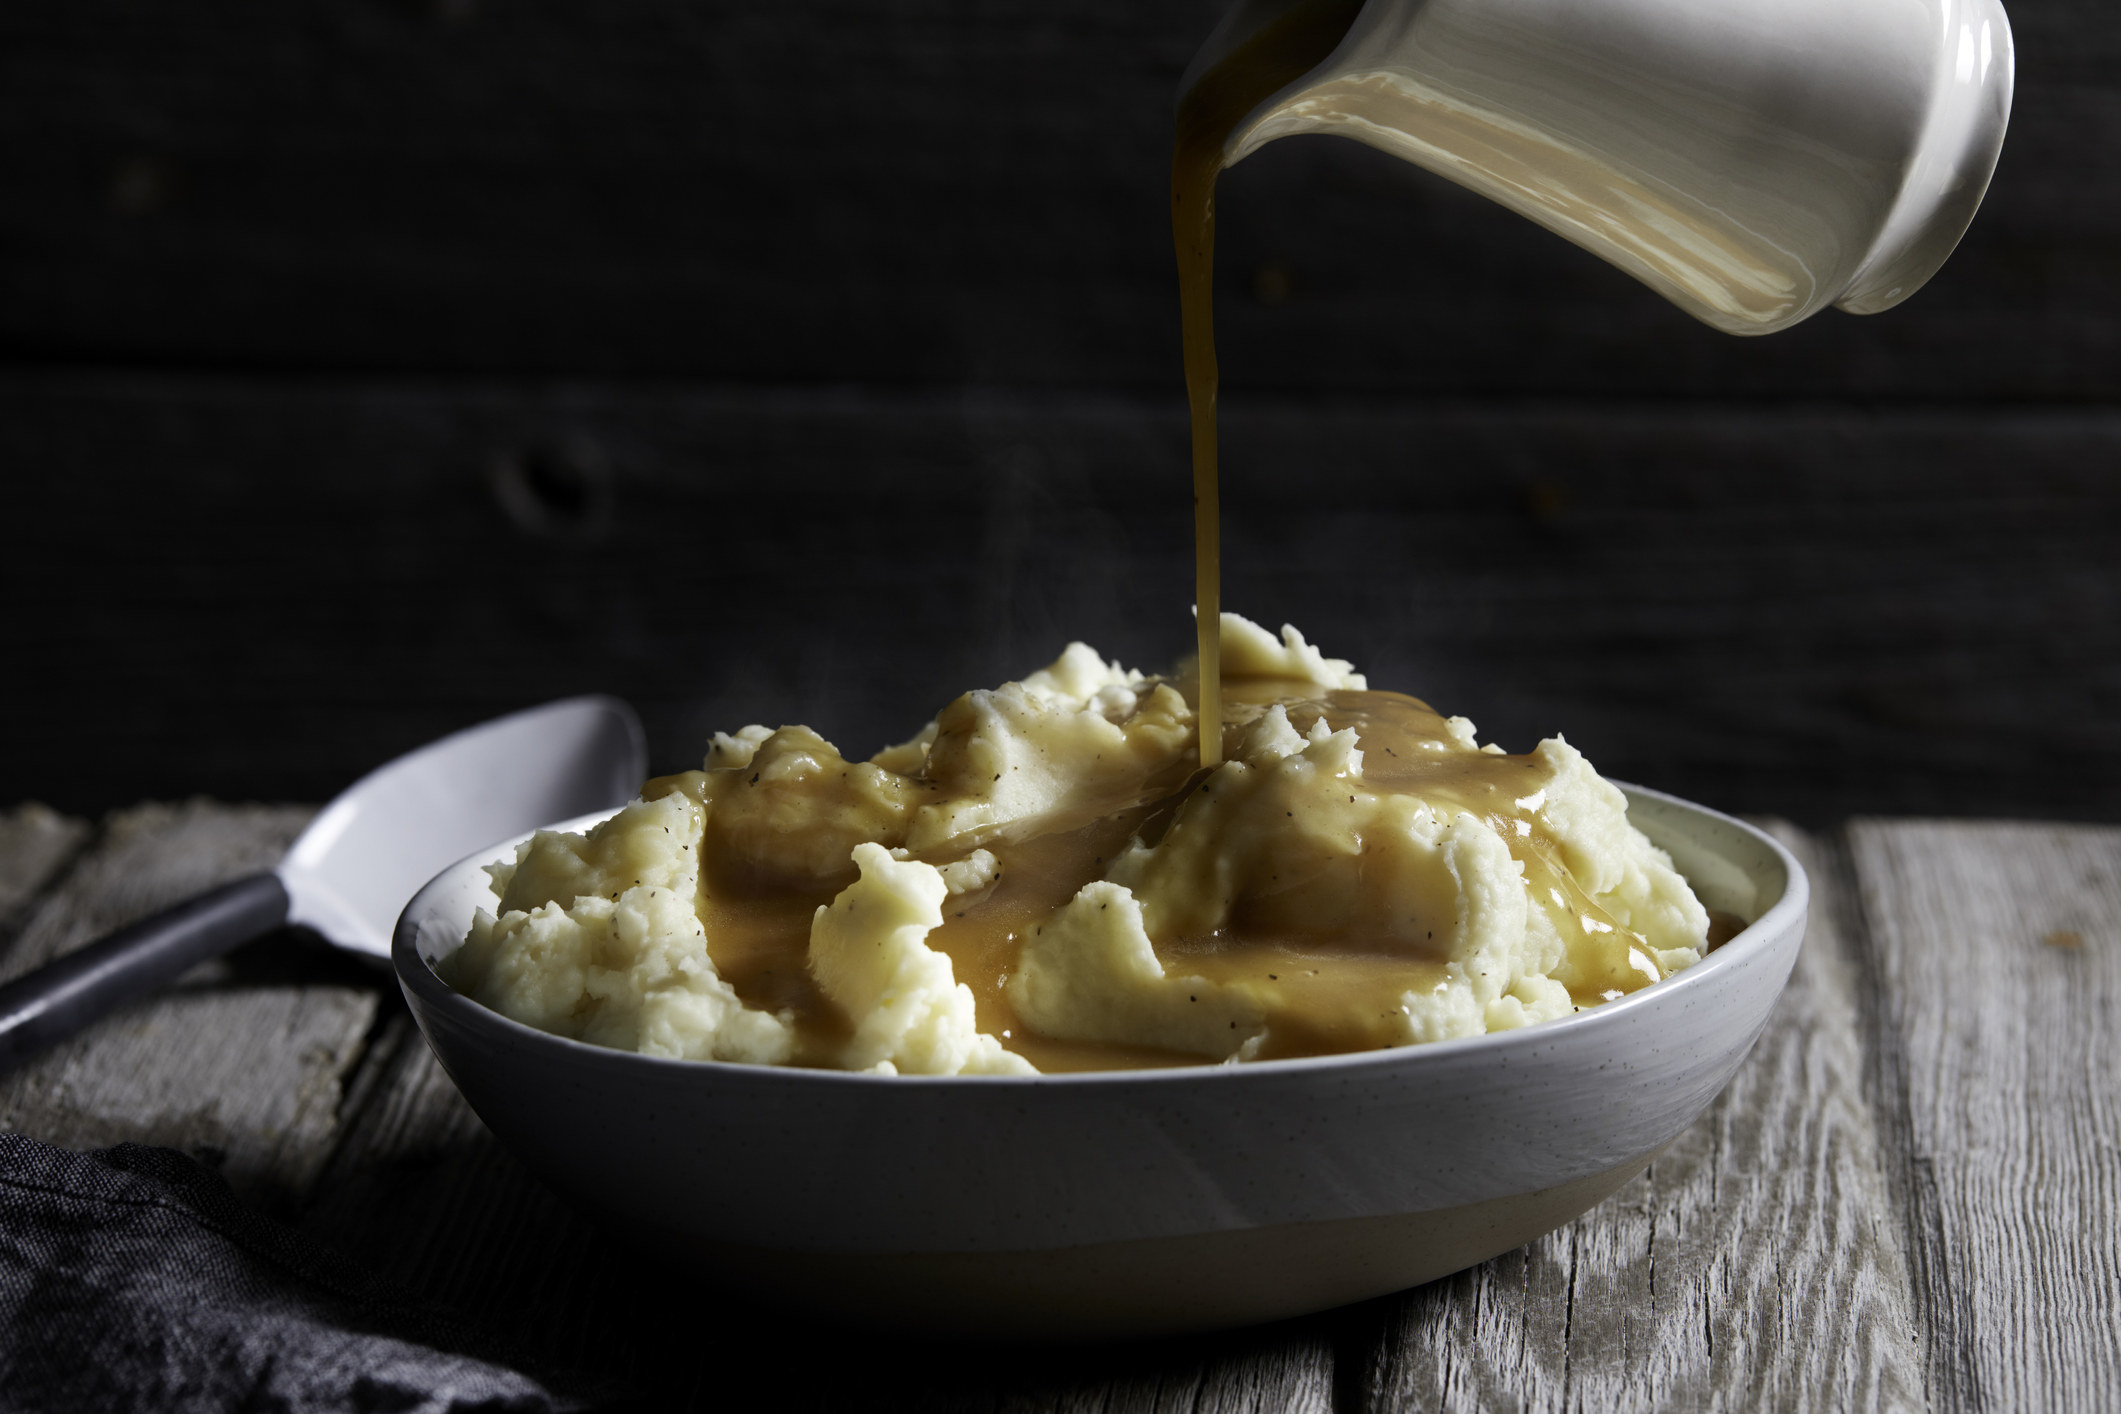 A jug of gravy being poured onto a bowl of steaming mashed potatoes